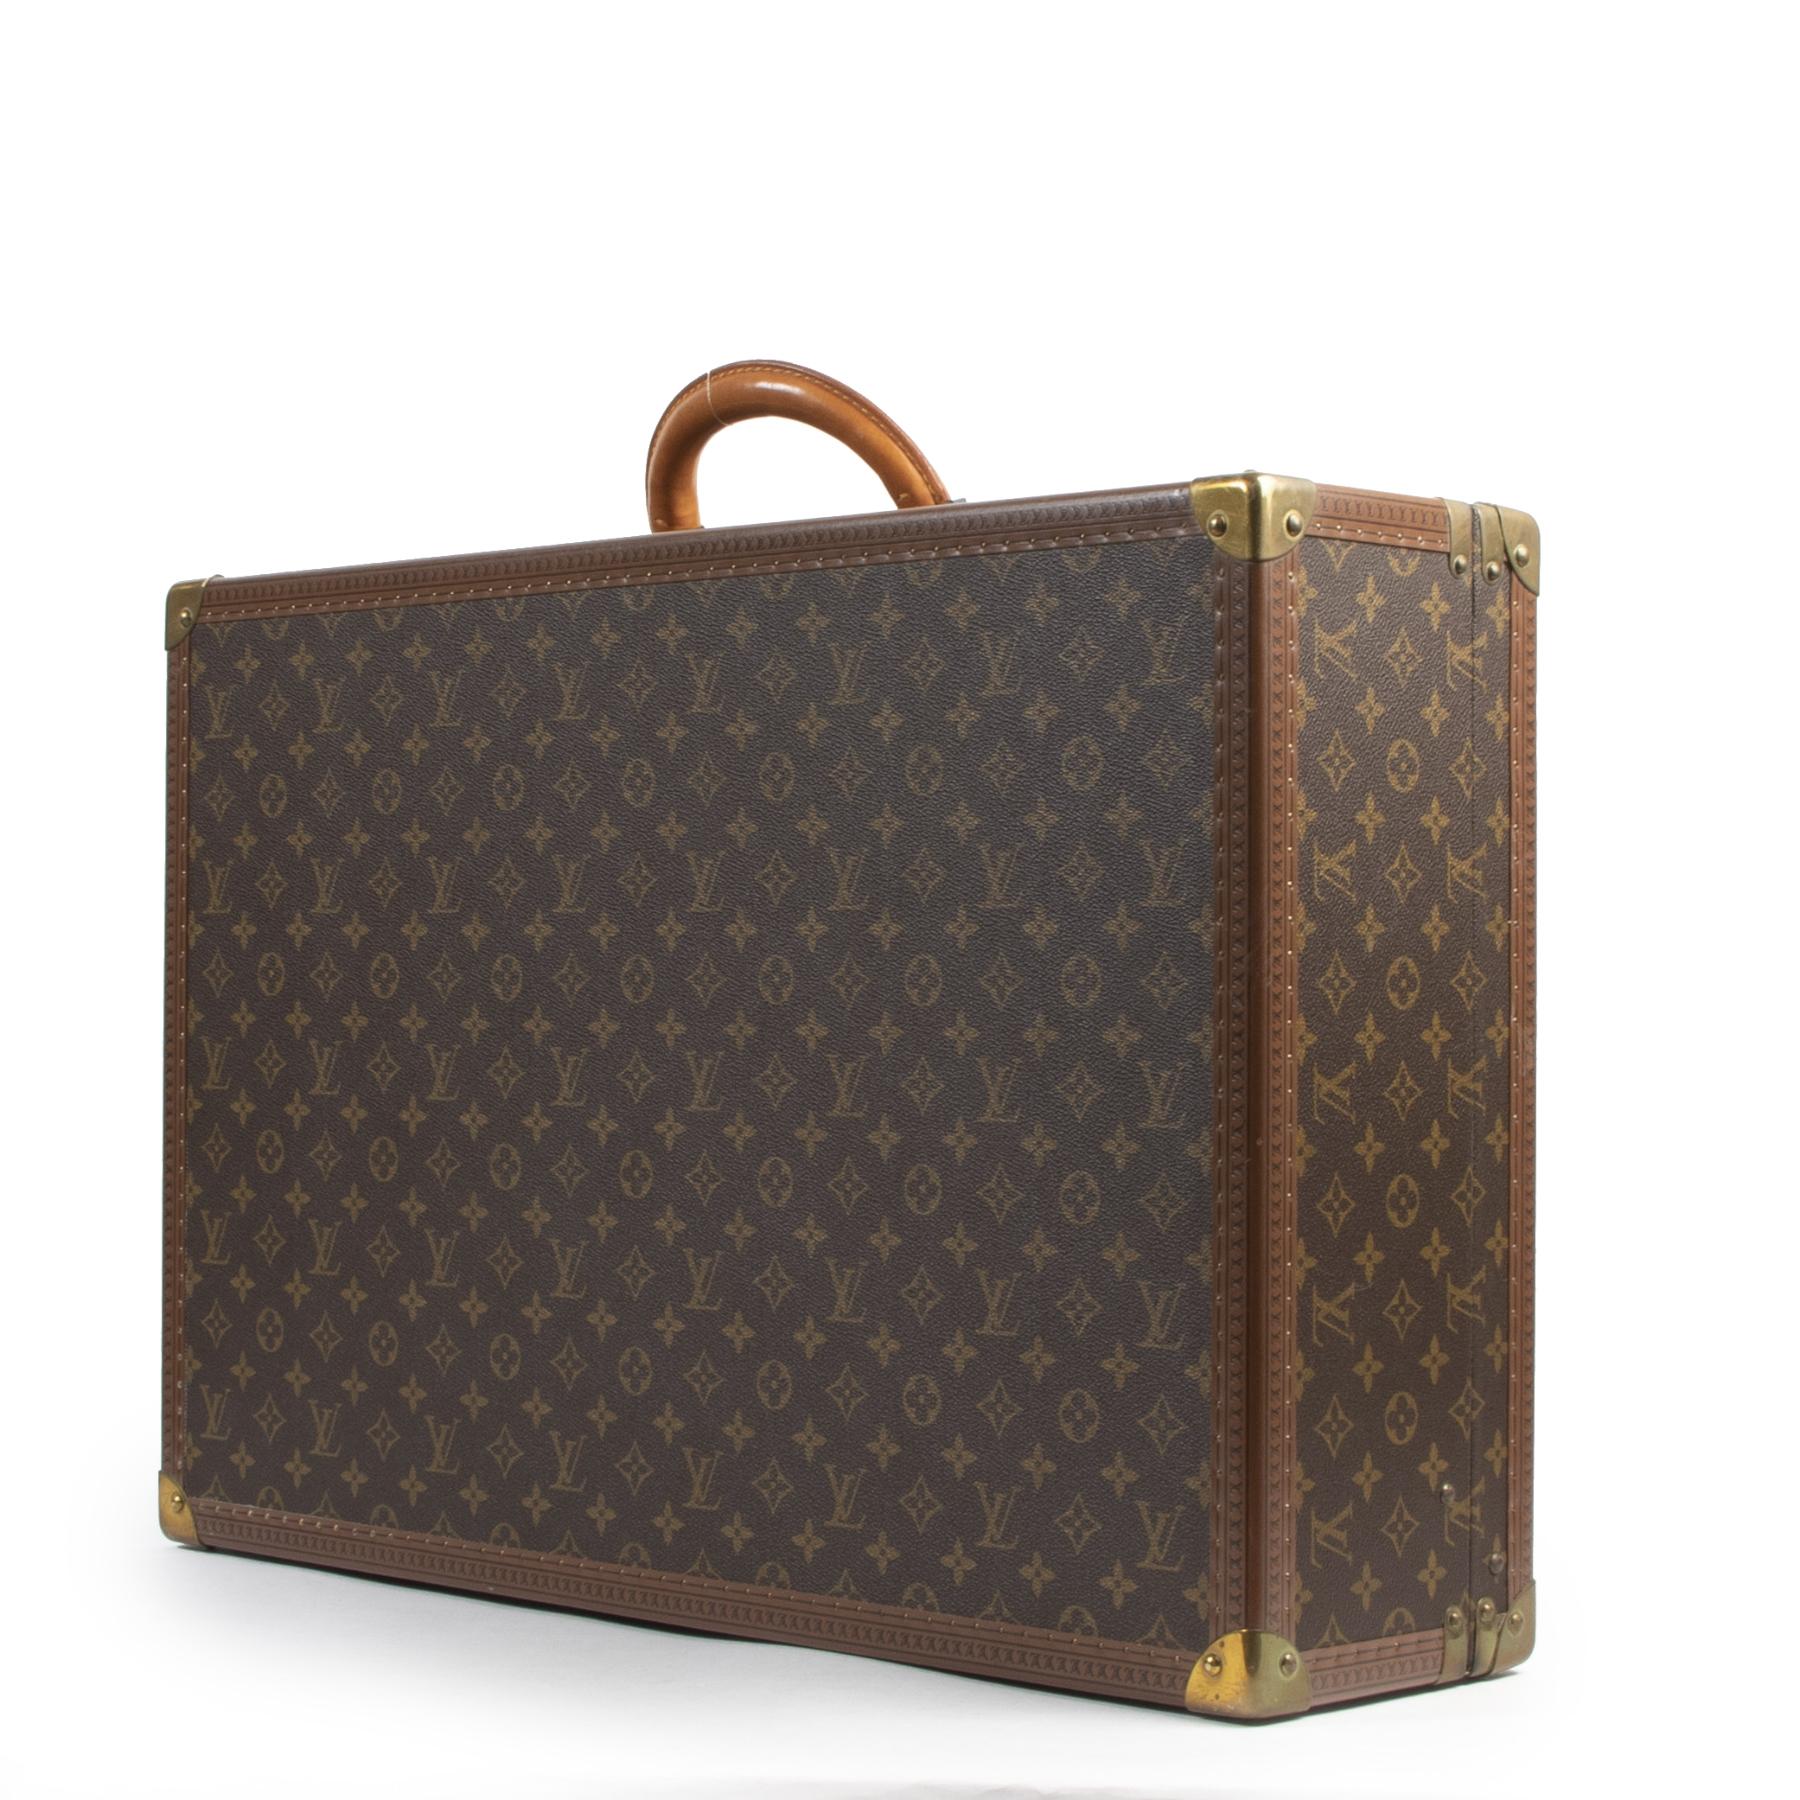 Very good condition

Louis Vuitton Bisten 65 Suitcase

The Bisten monogram suitcase is a timeless collector's piece which will keep your belongings safe. This travel case is crafted from coated canvas with stud details on each boarder. To preserve a